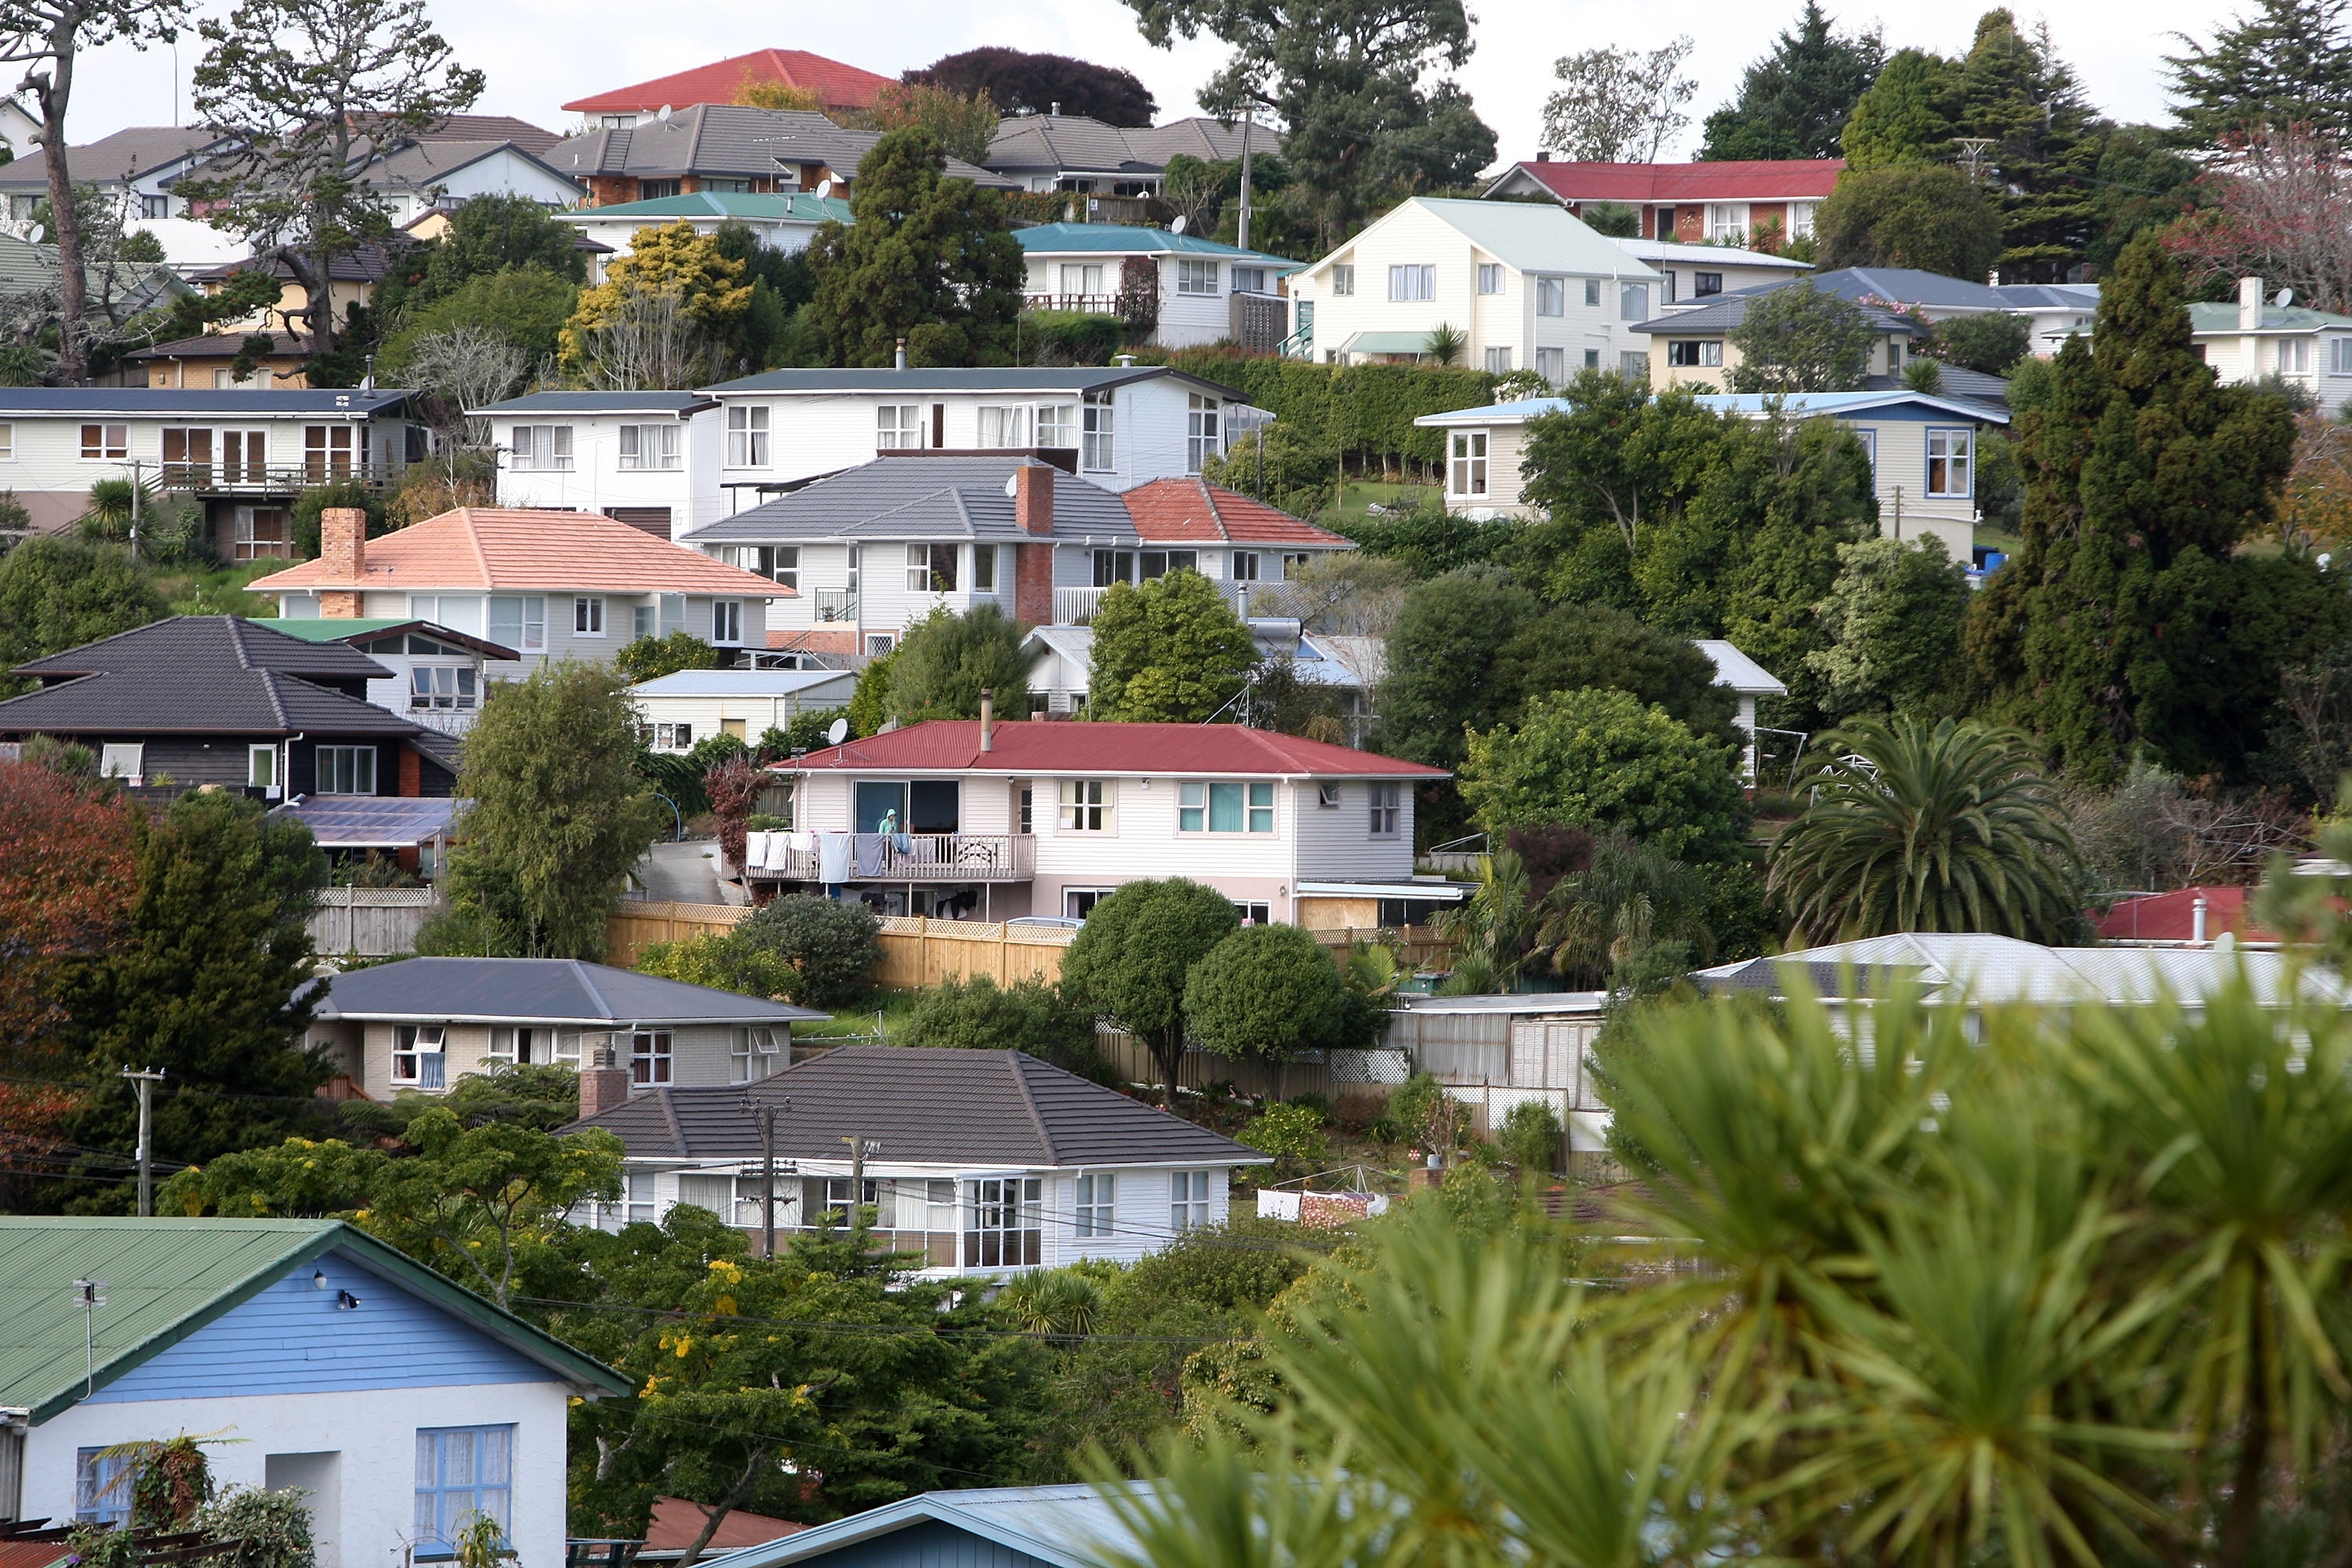 House prices in New Zealand have risen 30 per cent in the past year